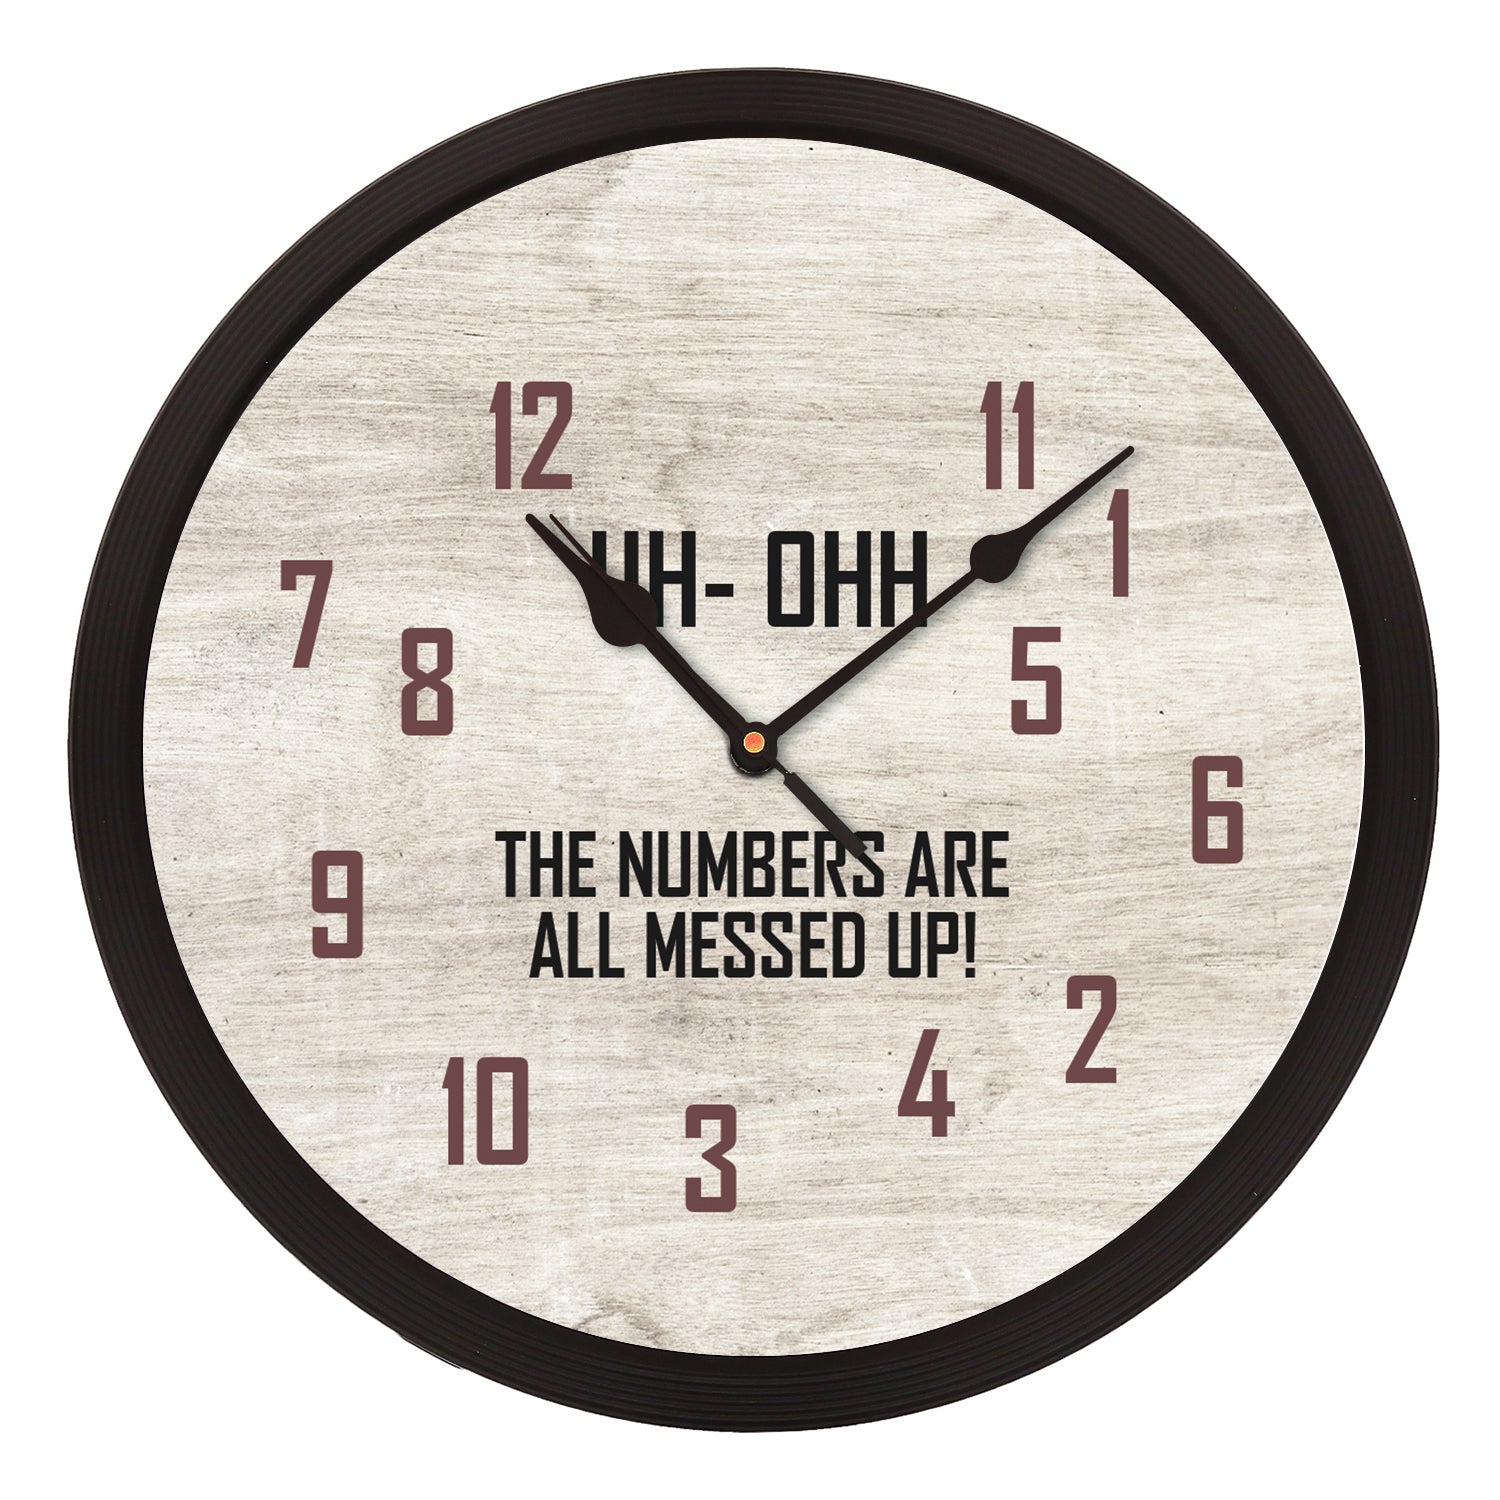 "The Numbers Are Messed Up" Designer Round Analog Black Wall Clock